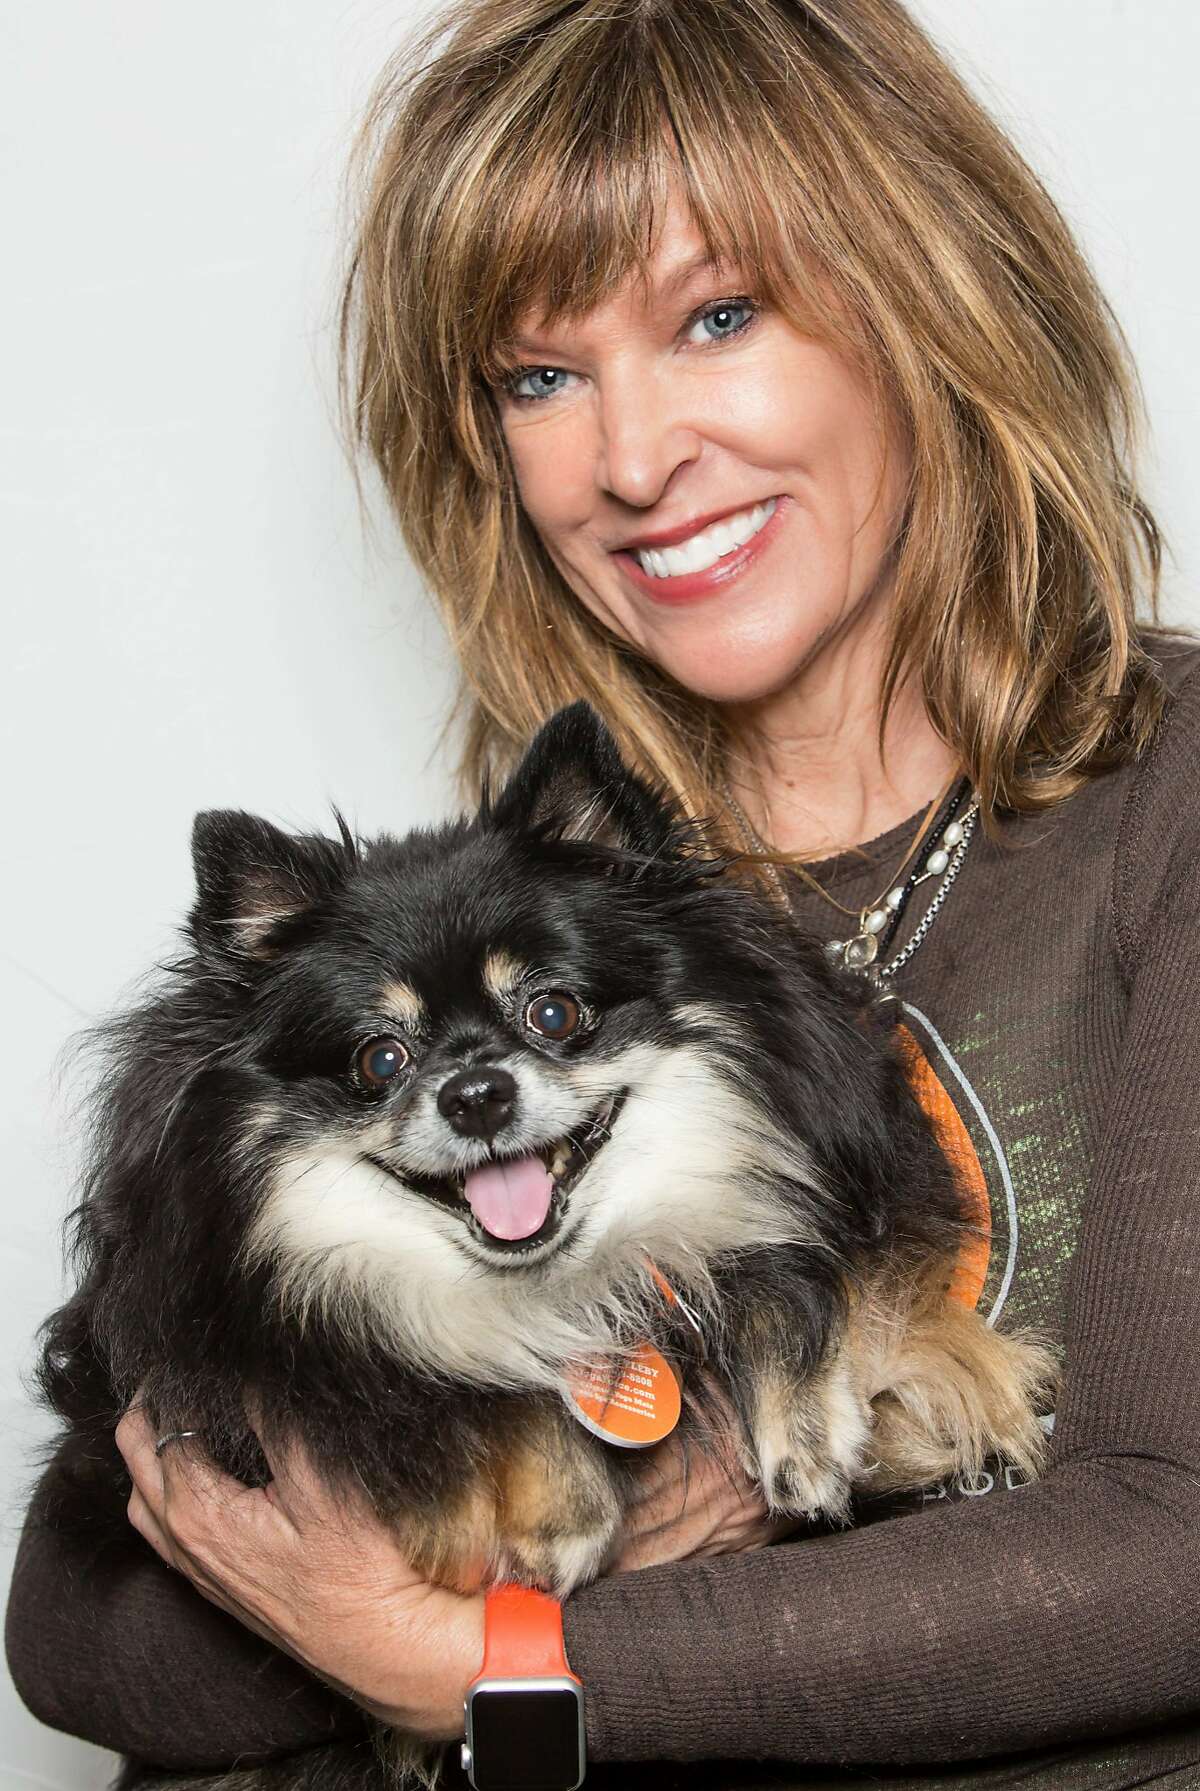 Anne Appleby, founder of YogaForce, will be teaching "doga" (dog yoga) May 18 at Wilkes Bashford Palo Alto. The event benefits the Peninsula Humane Society and the SPCA.